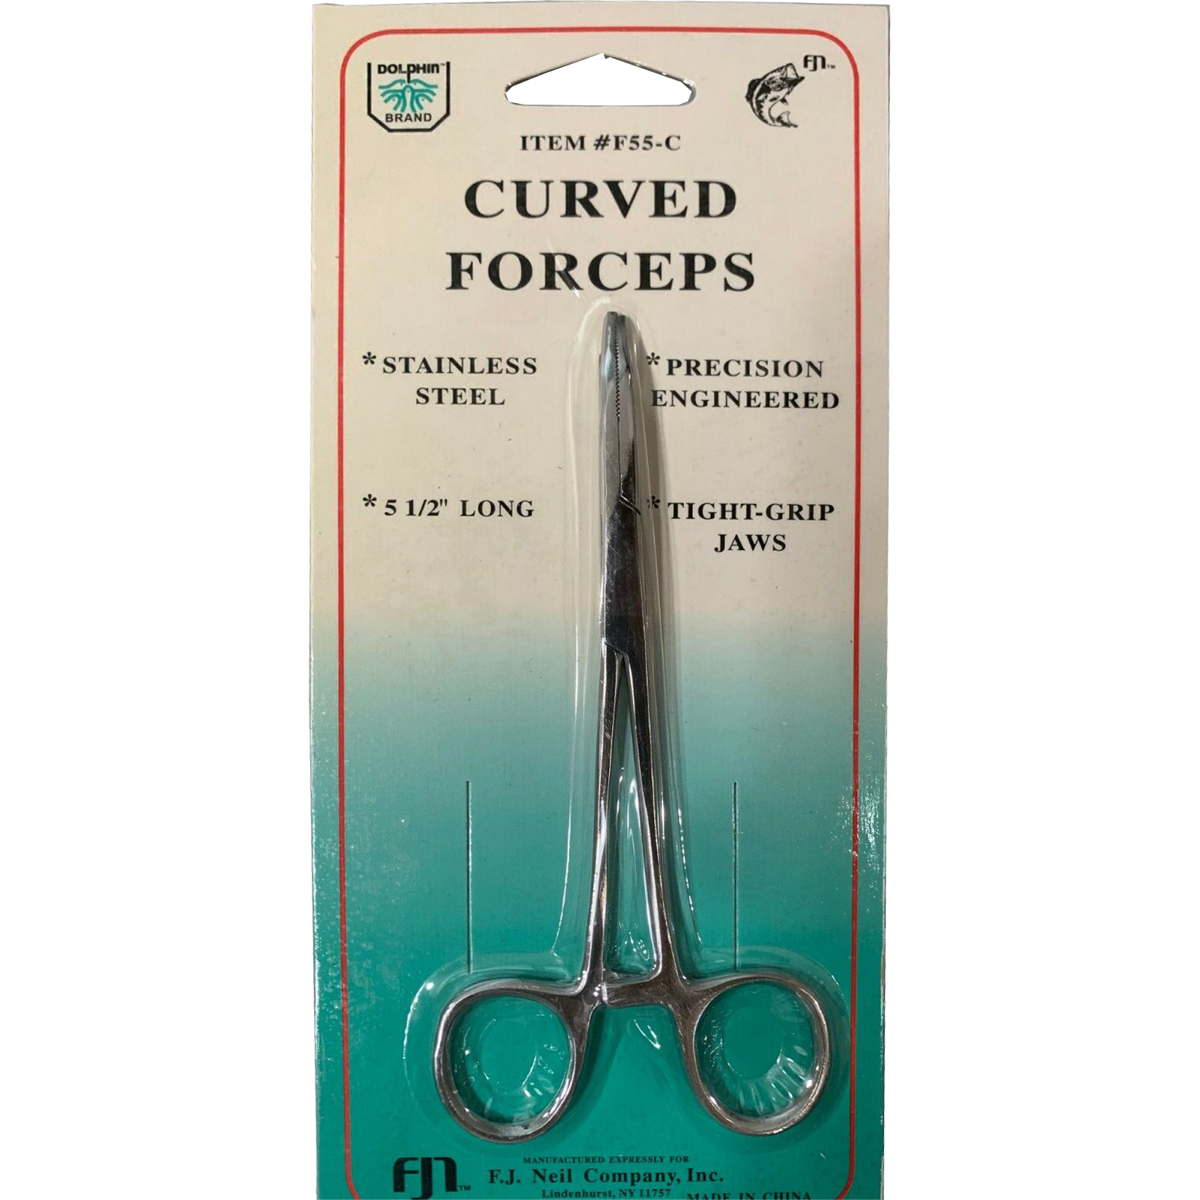 Photo of F.J. Neil Hemostat Pliers - Curved for sale at United Tackle Shops.